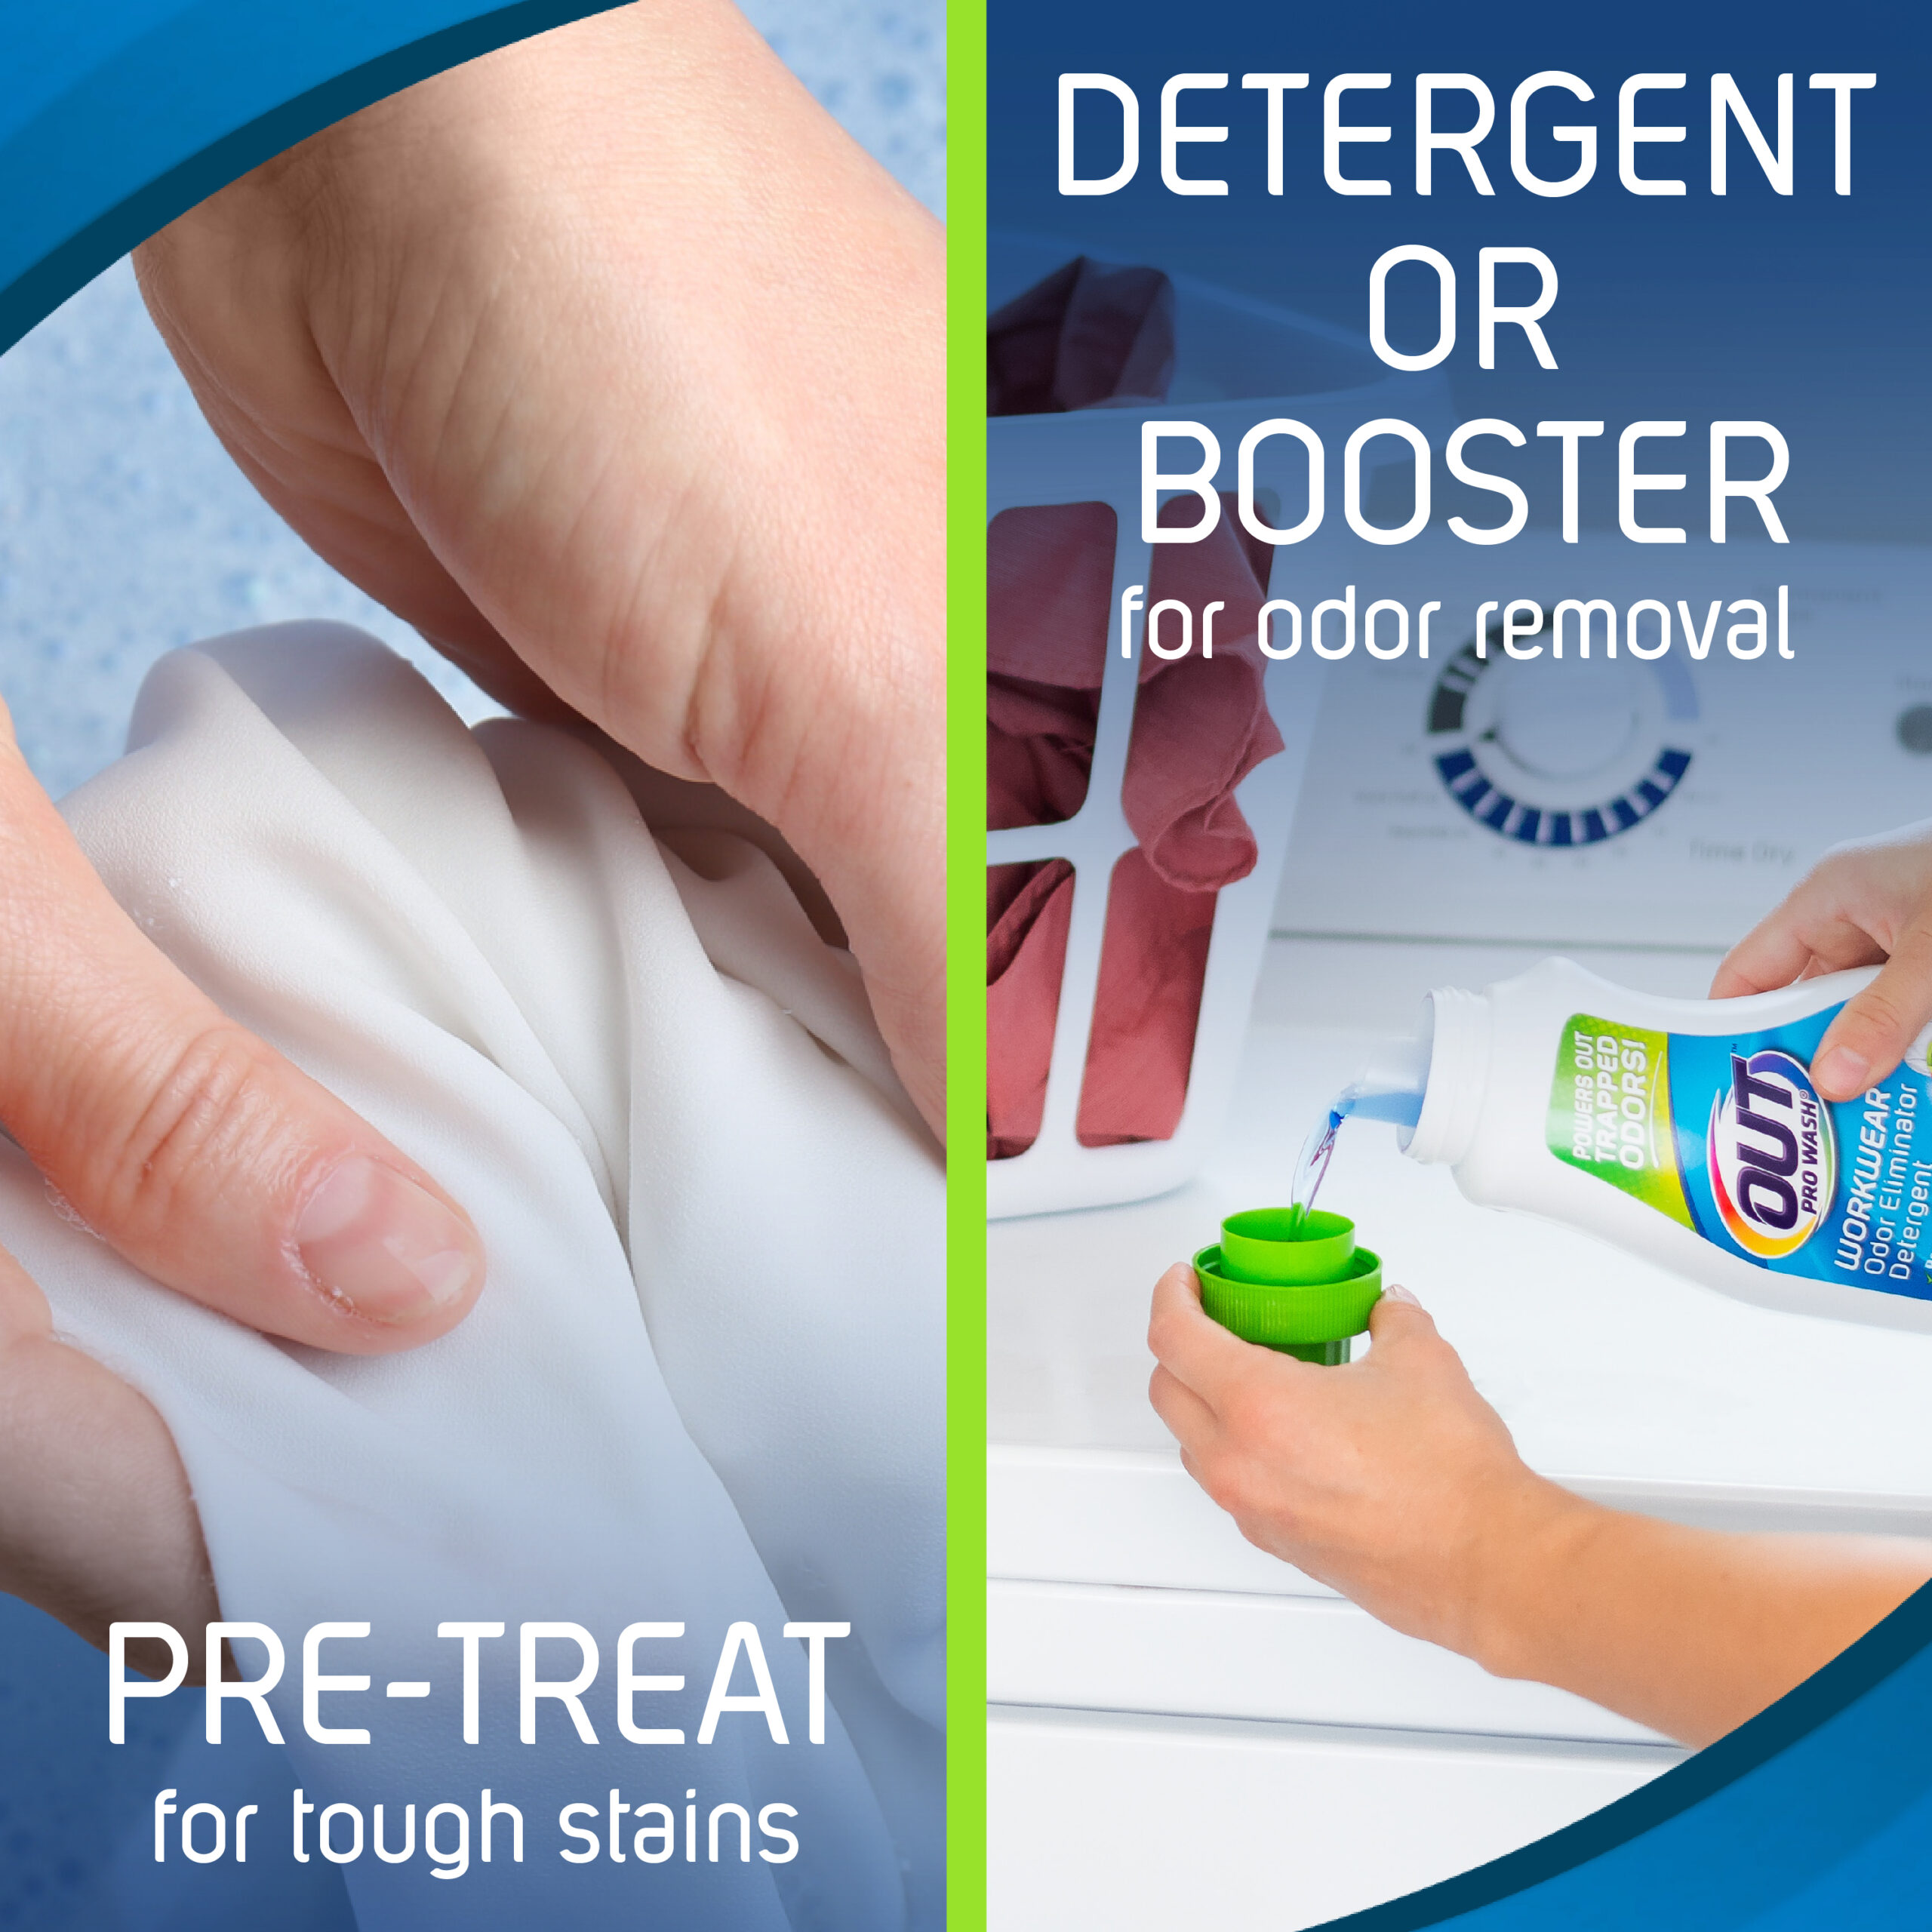 Browse Laundry Products for Odor Removal